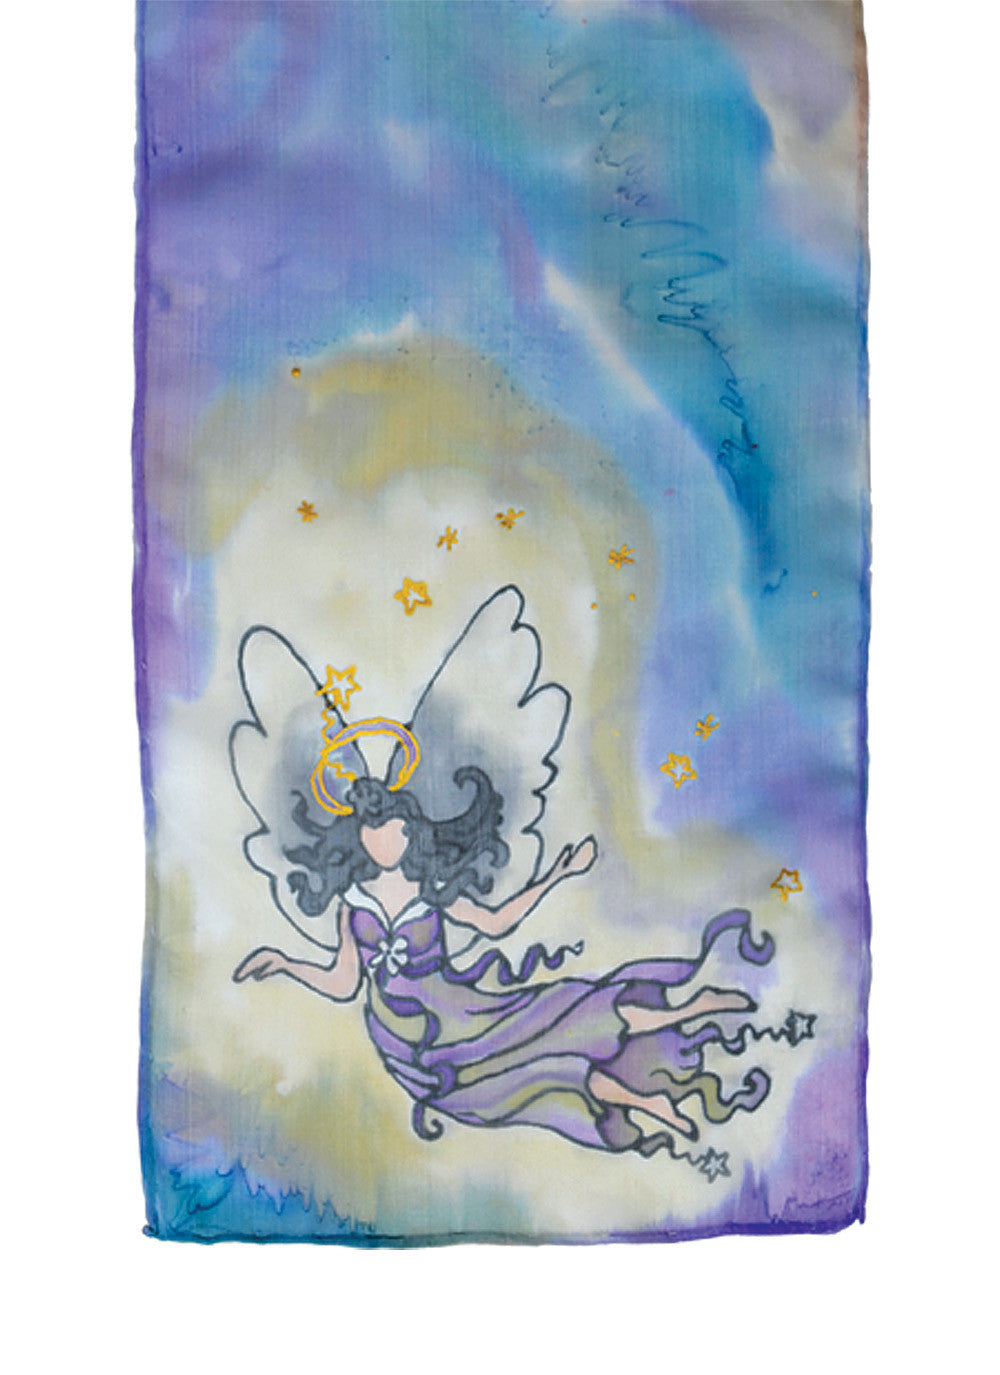 Hand-painted silk scarf purple and blue stardust angel design